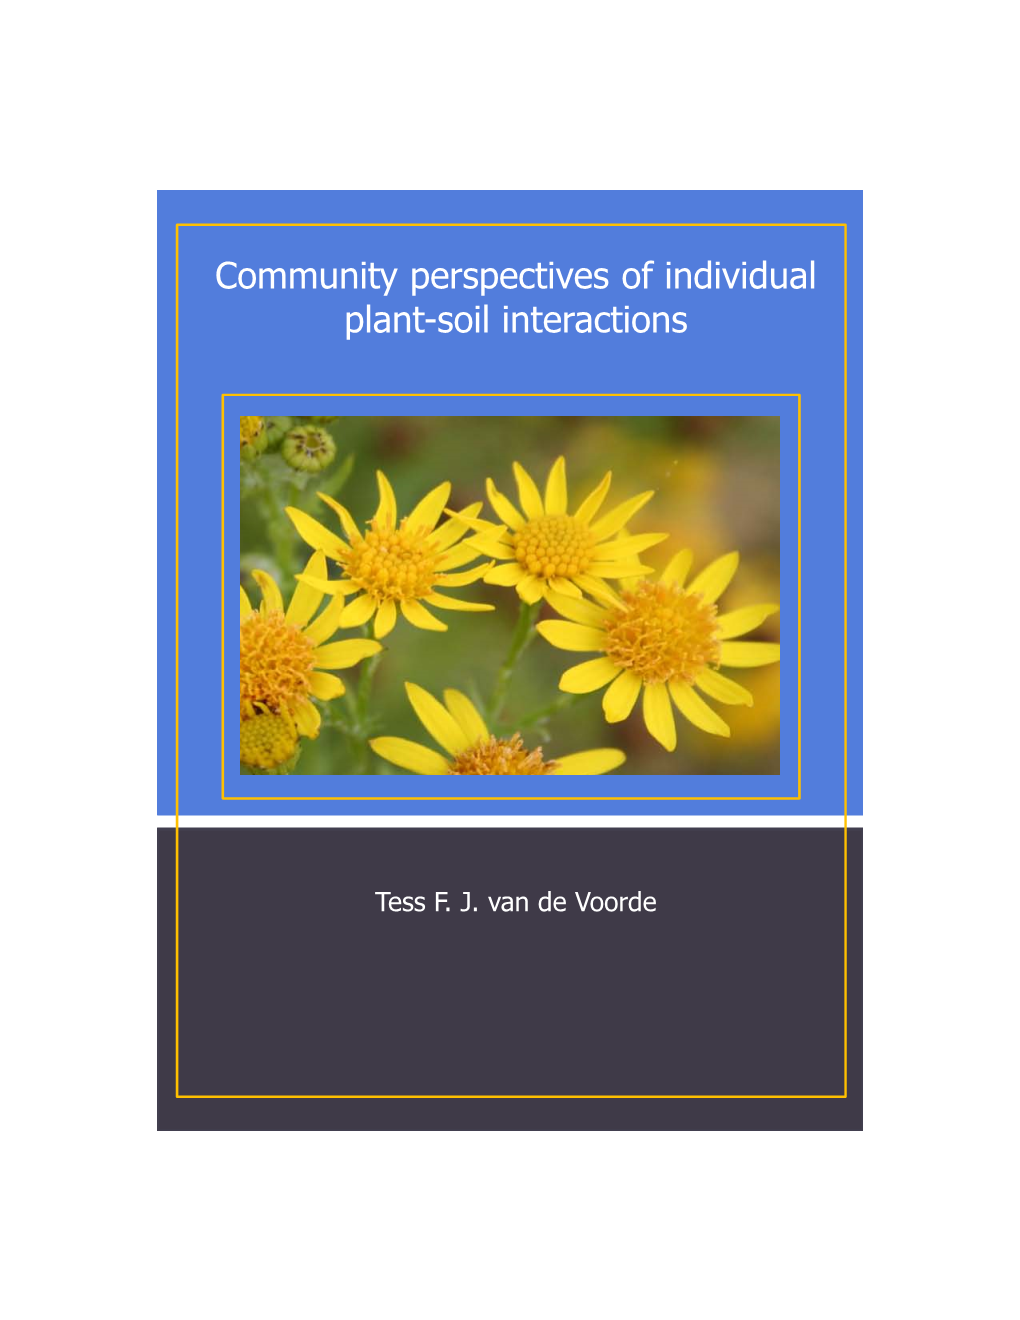 Community Perspectives of Individual Plant-Soil Interactions